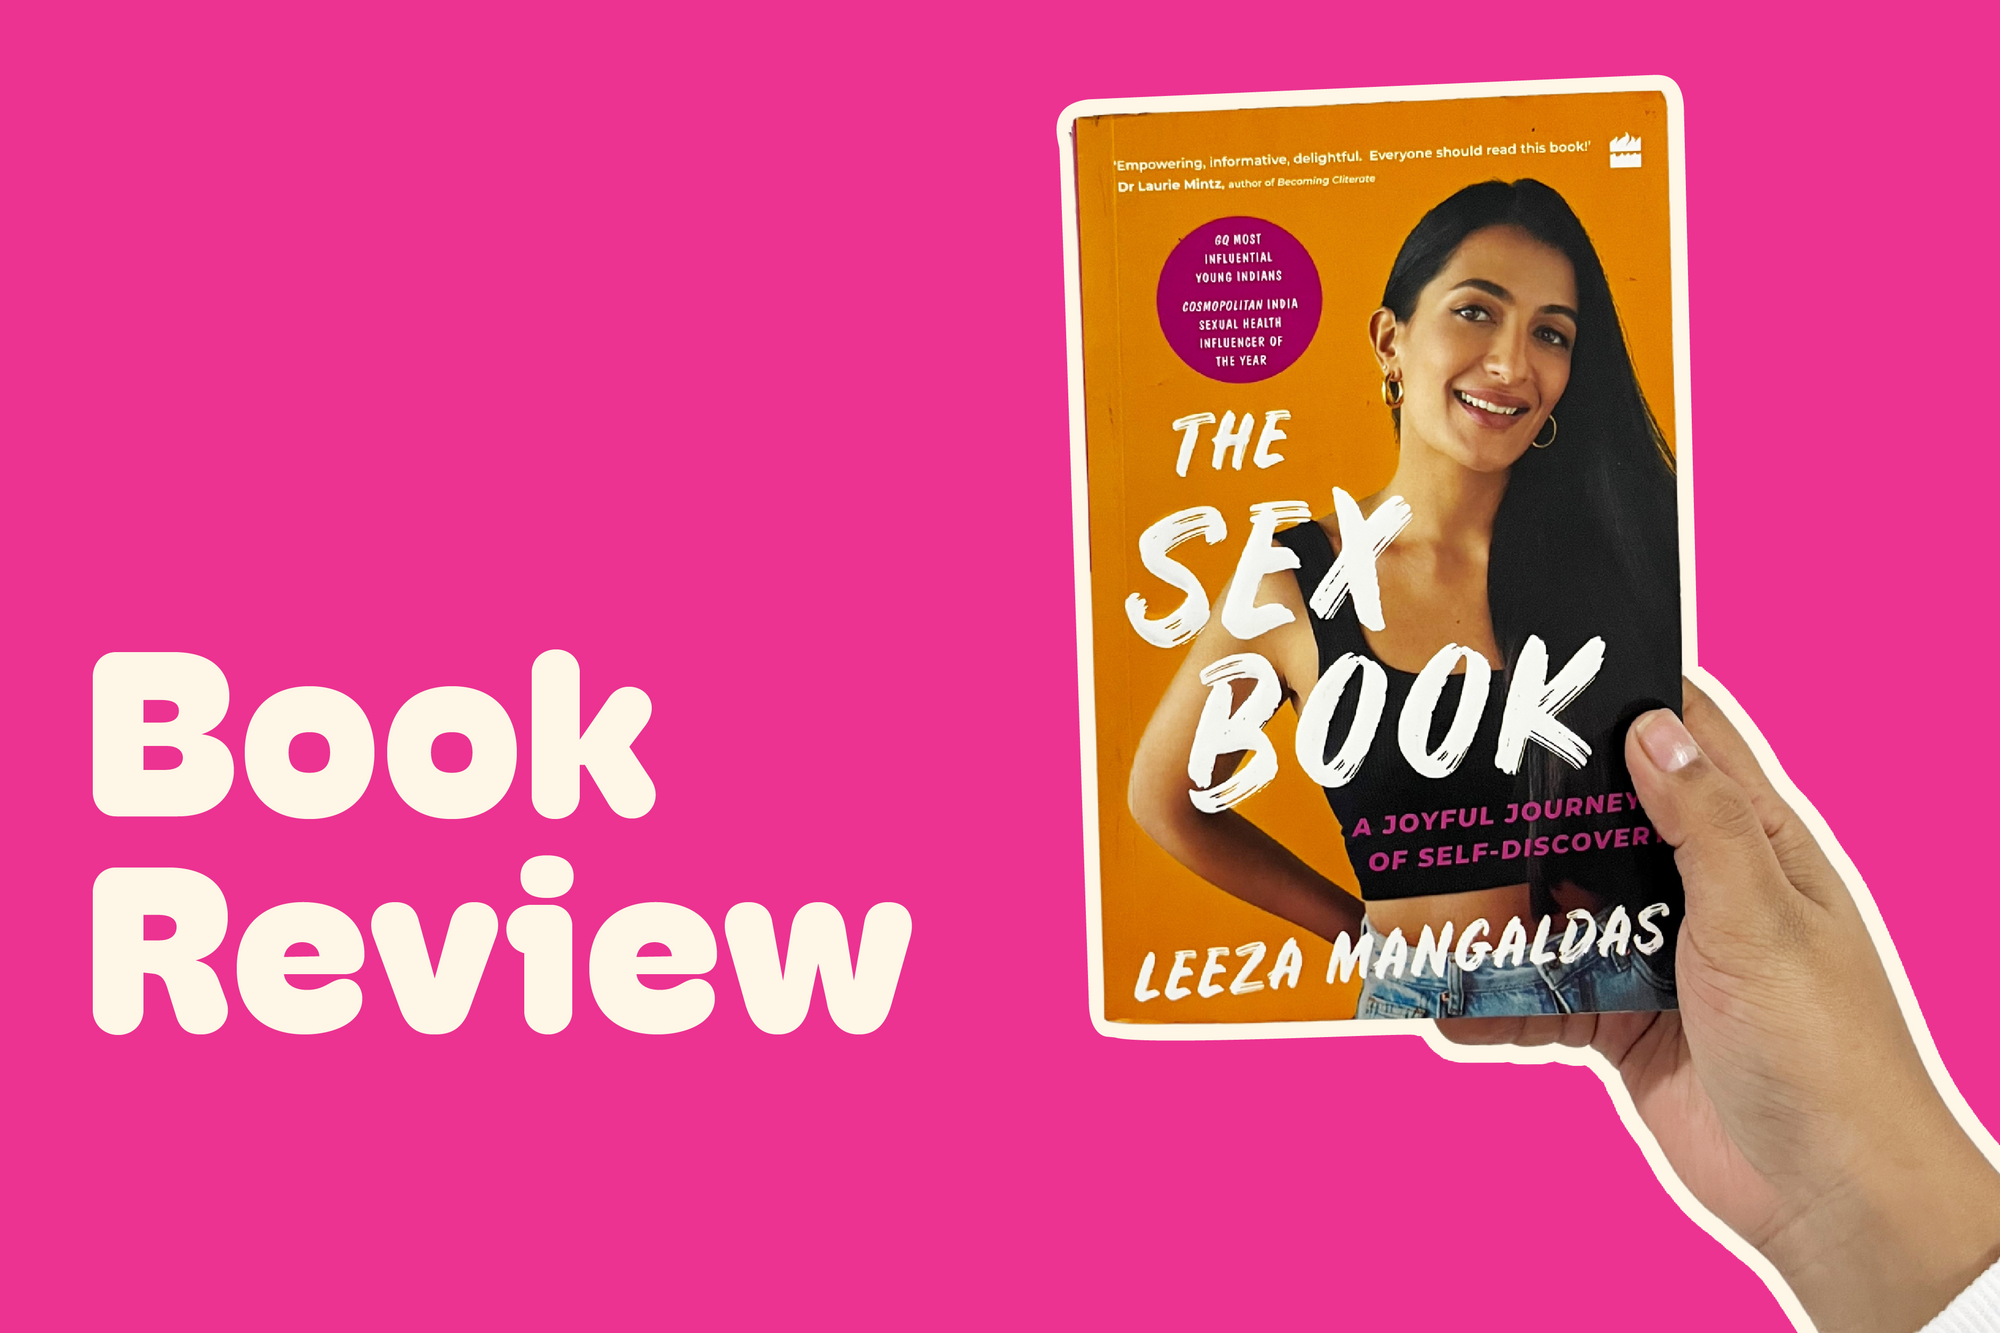 Your Handy Guide for Pleasure: ‘The Sex Book’ by Leeza Mangaldas